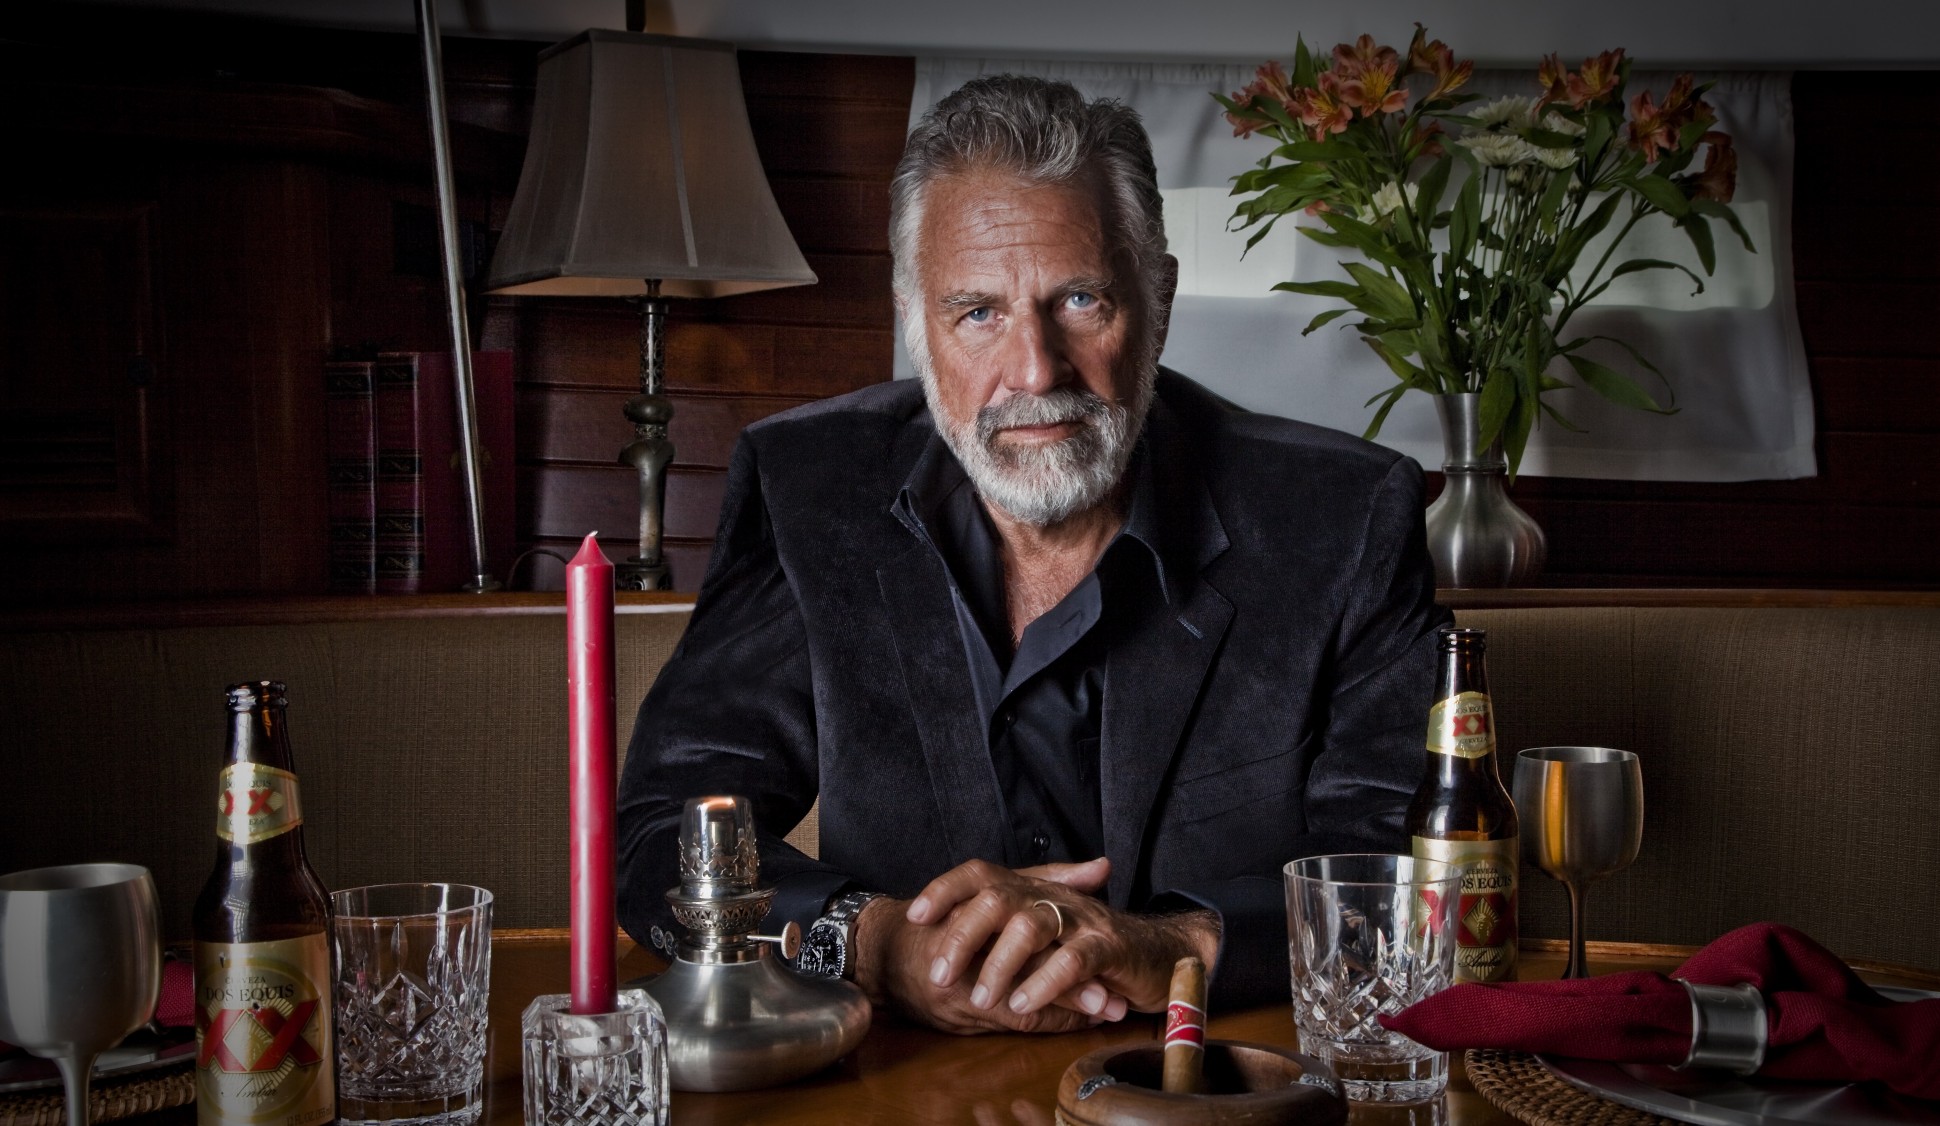 After 10 Years, Dos Equis Will Replace “Most Interesting Man In The World”